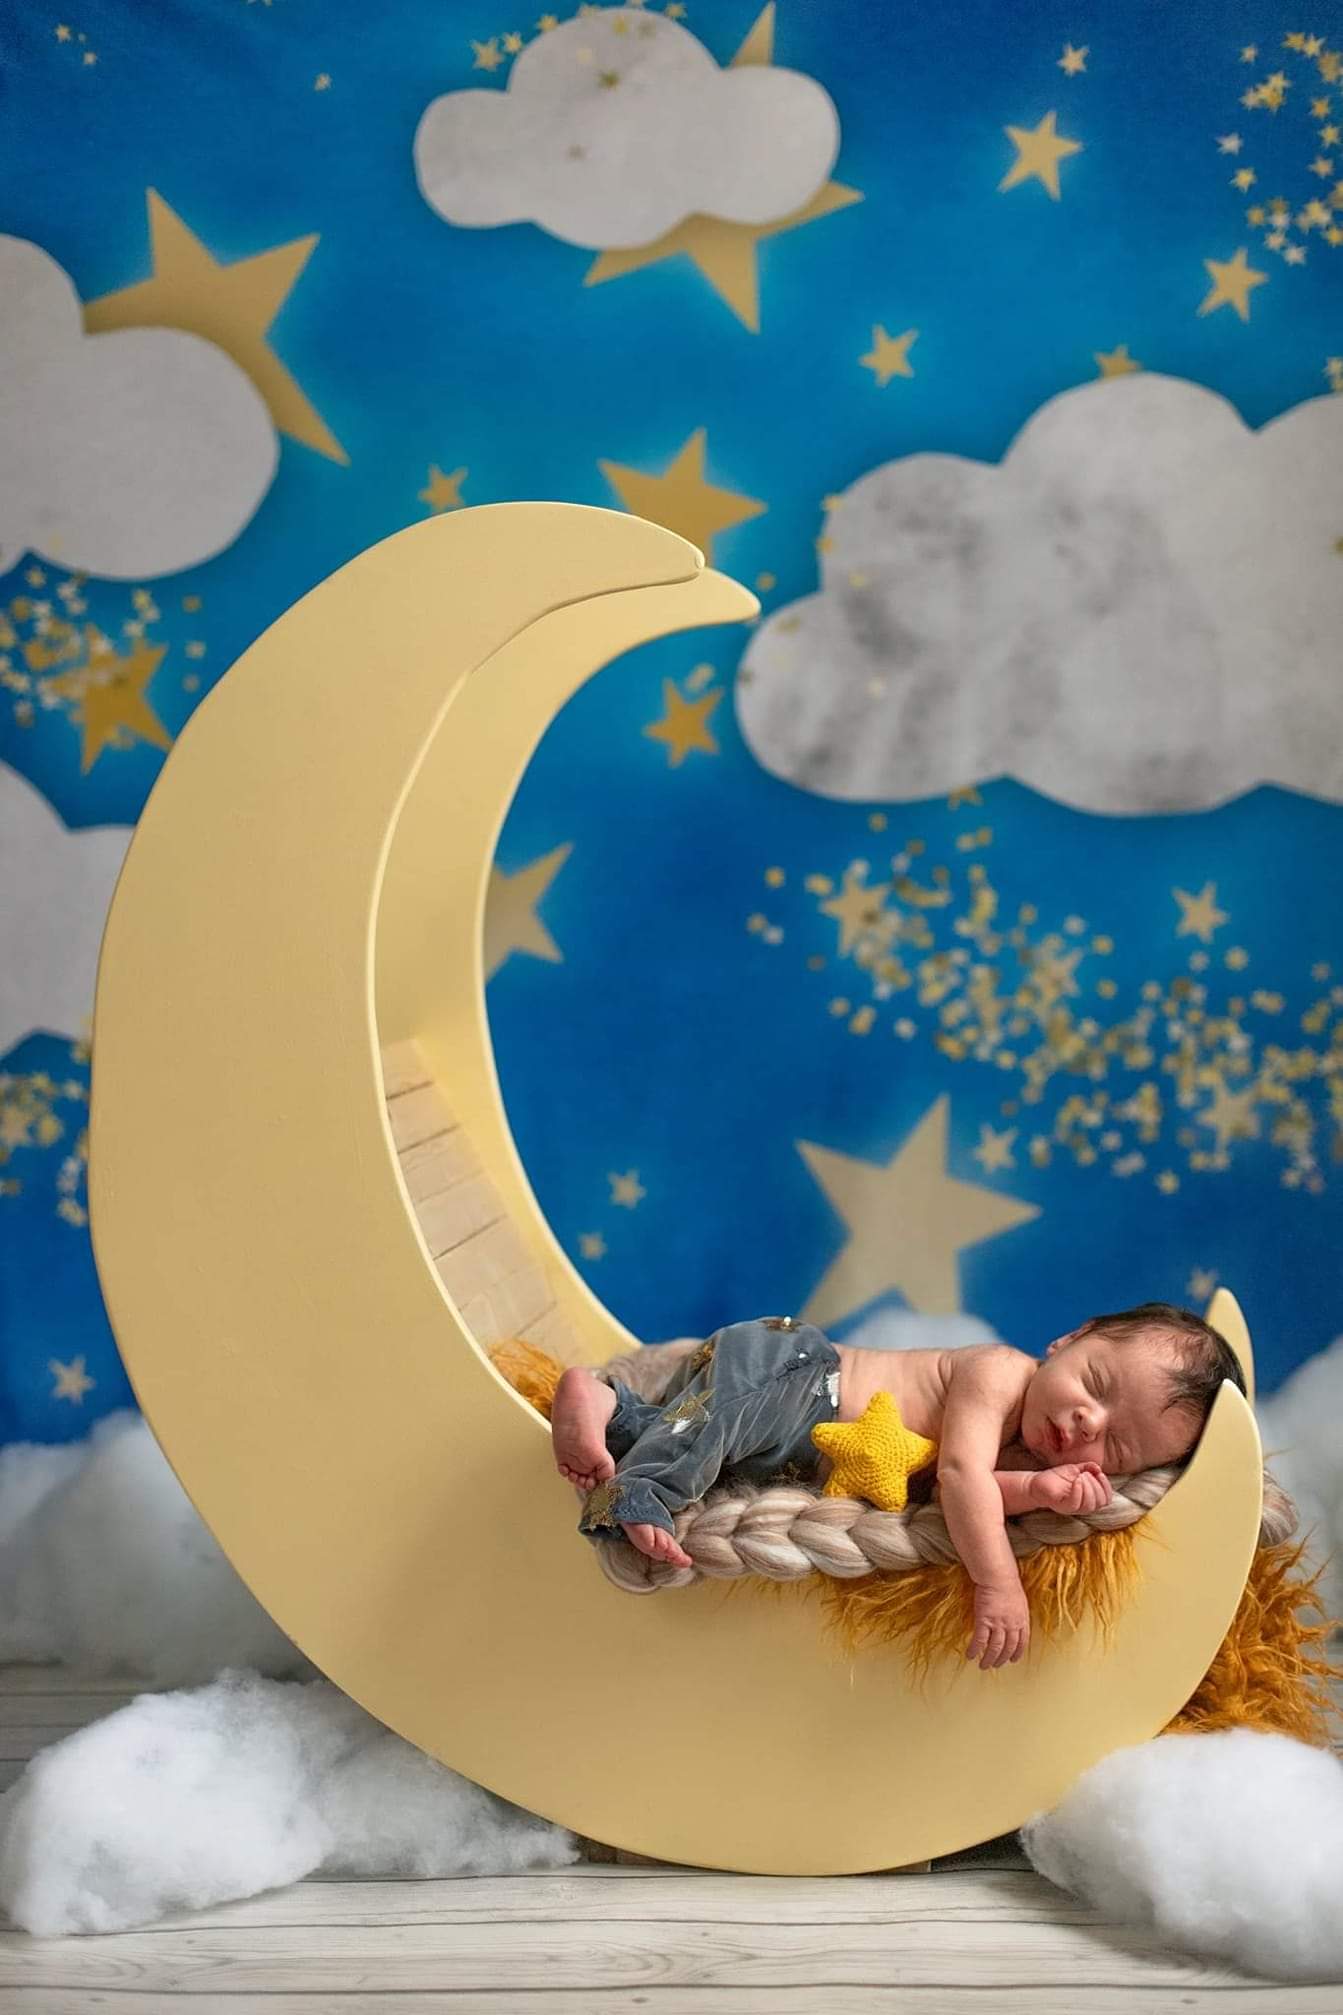 Kate Baby Skies Clouds With Tiny Stars Backdrop for Photography Designed by Mini MakeBelieve